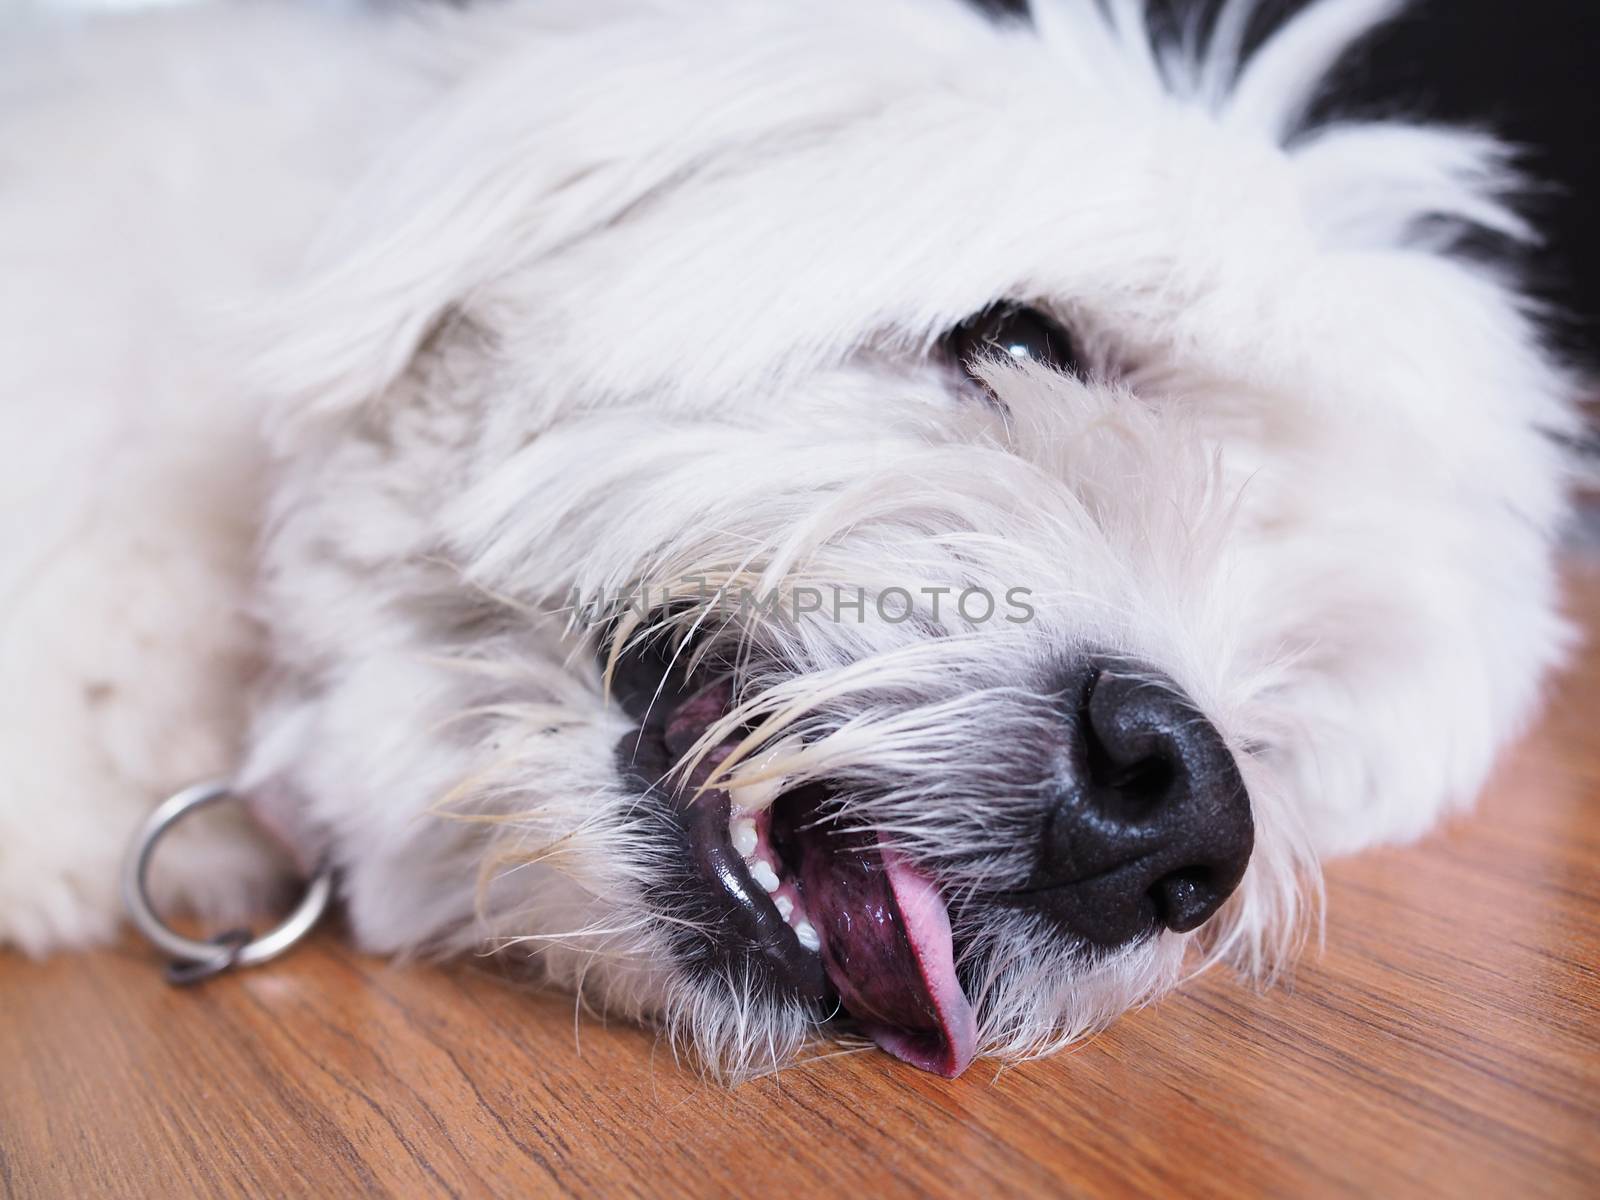 old white dog lying on a wooden floor Stick the tongue out for cooling In the mouth, saw teeth and fangs